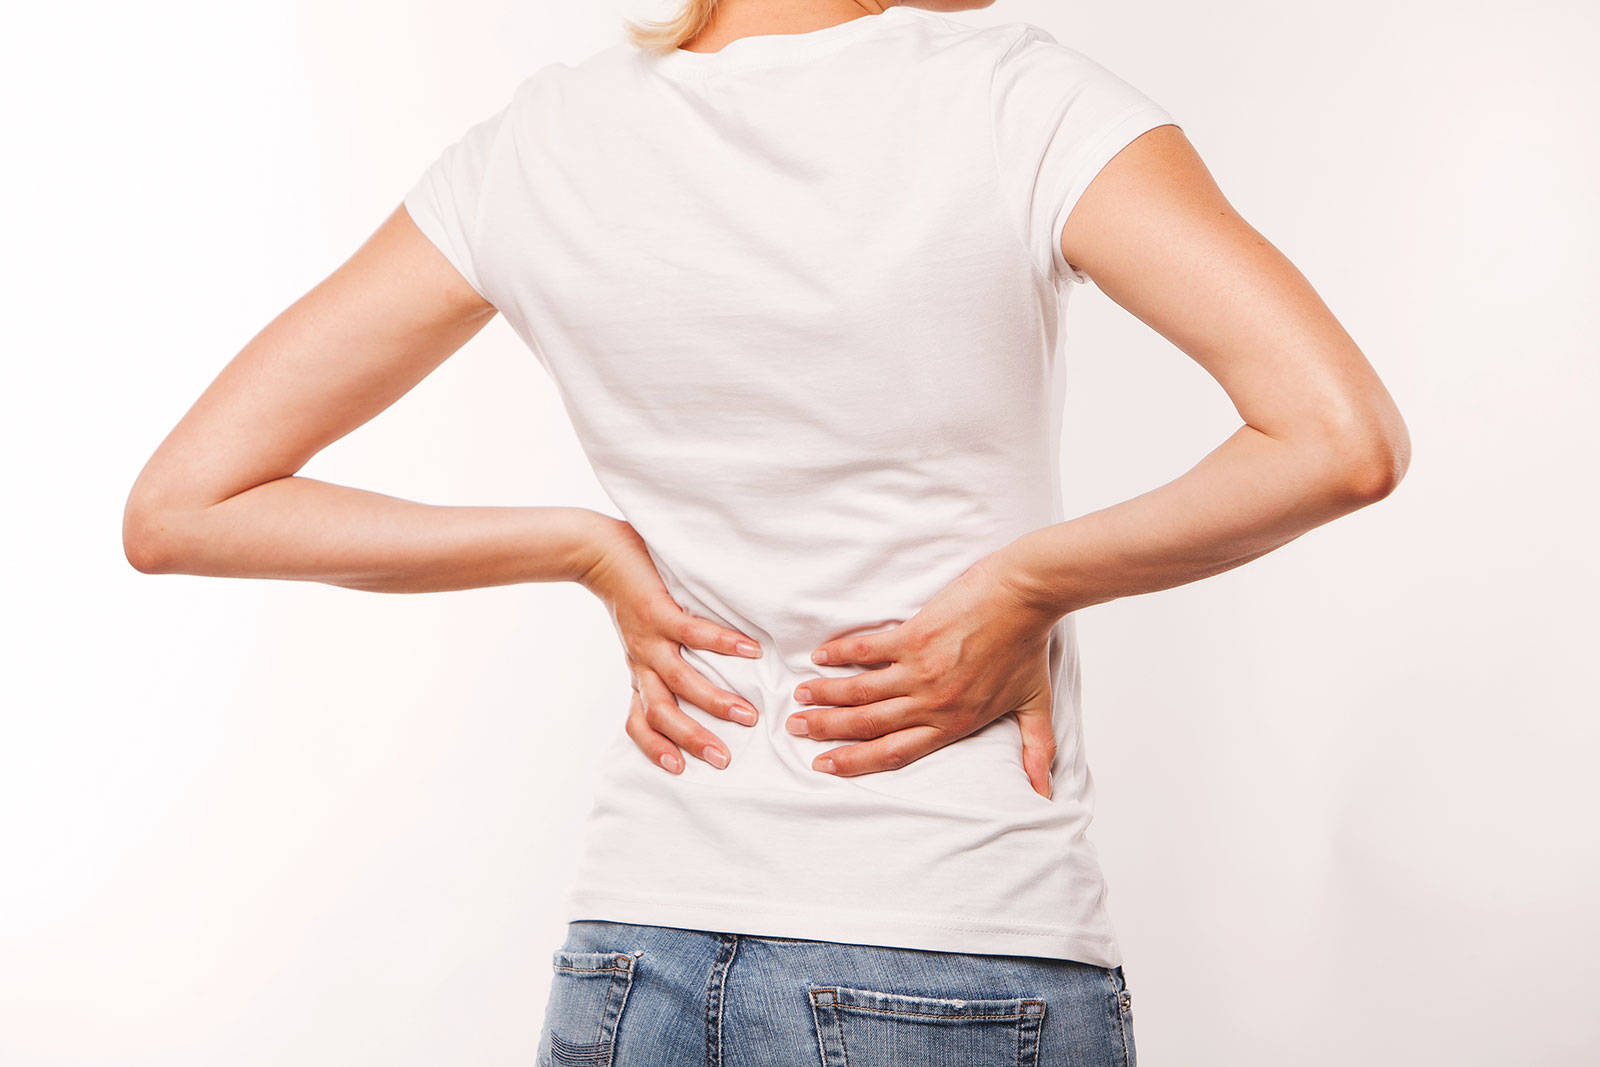 Healing Sciatic Pain Naturally And Holistically